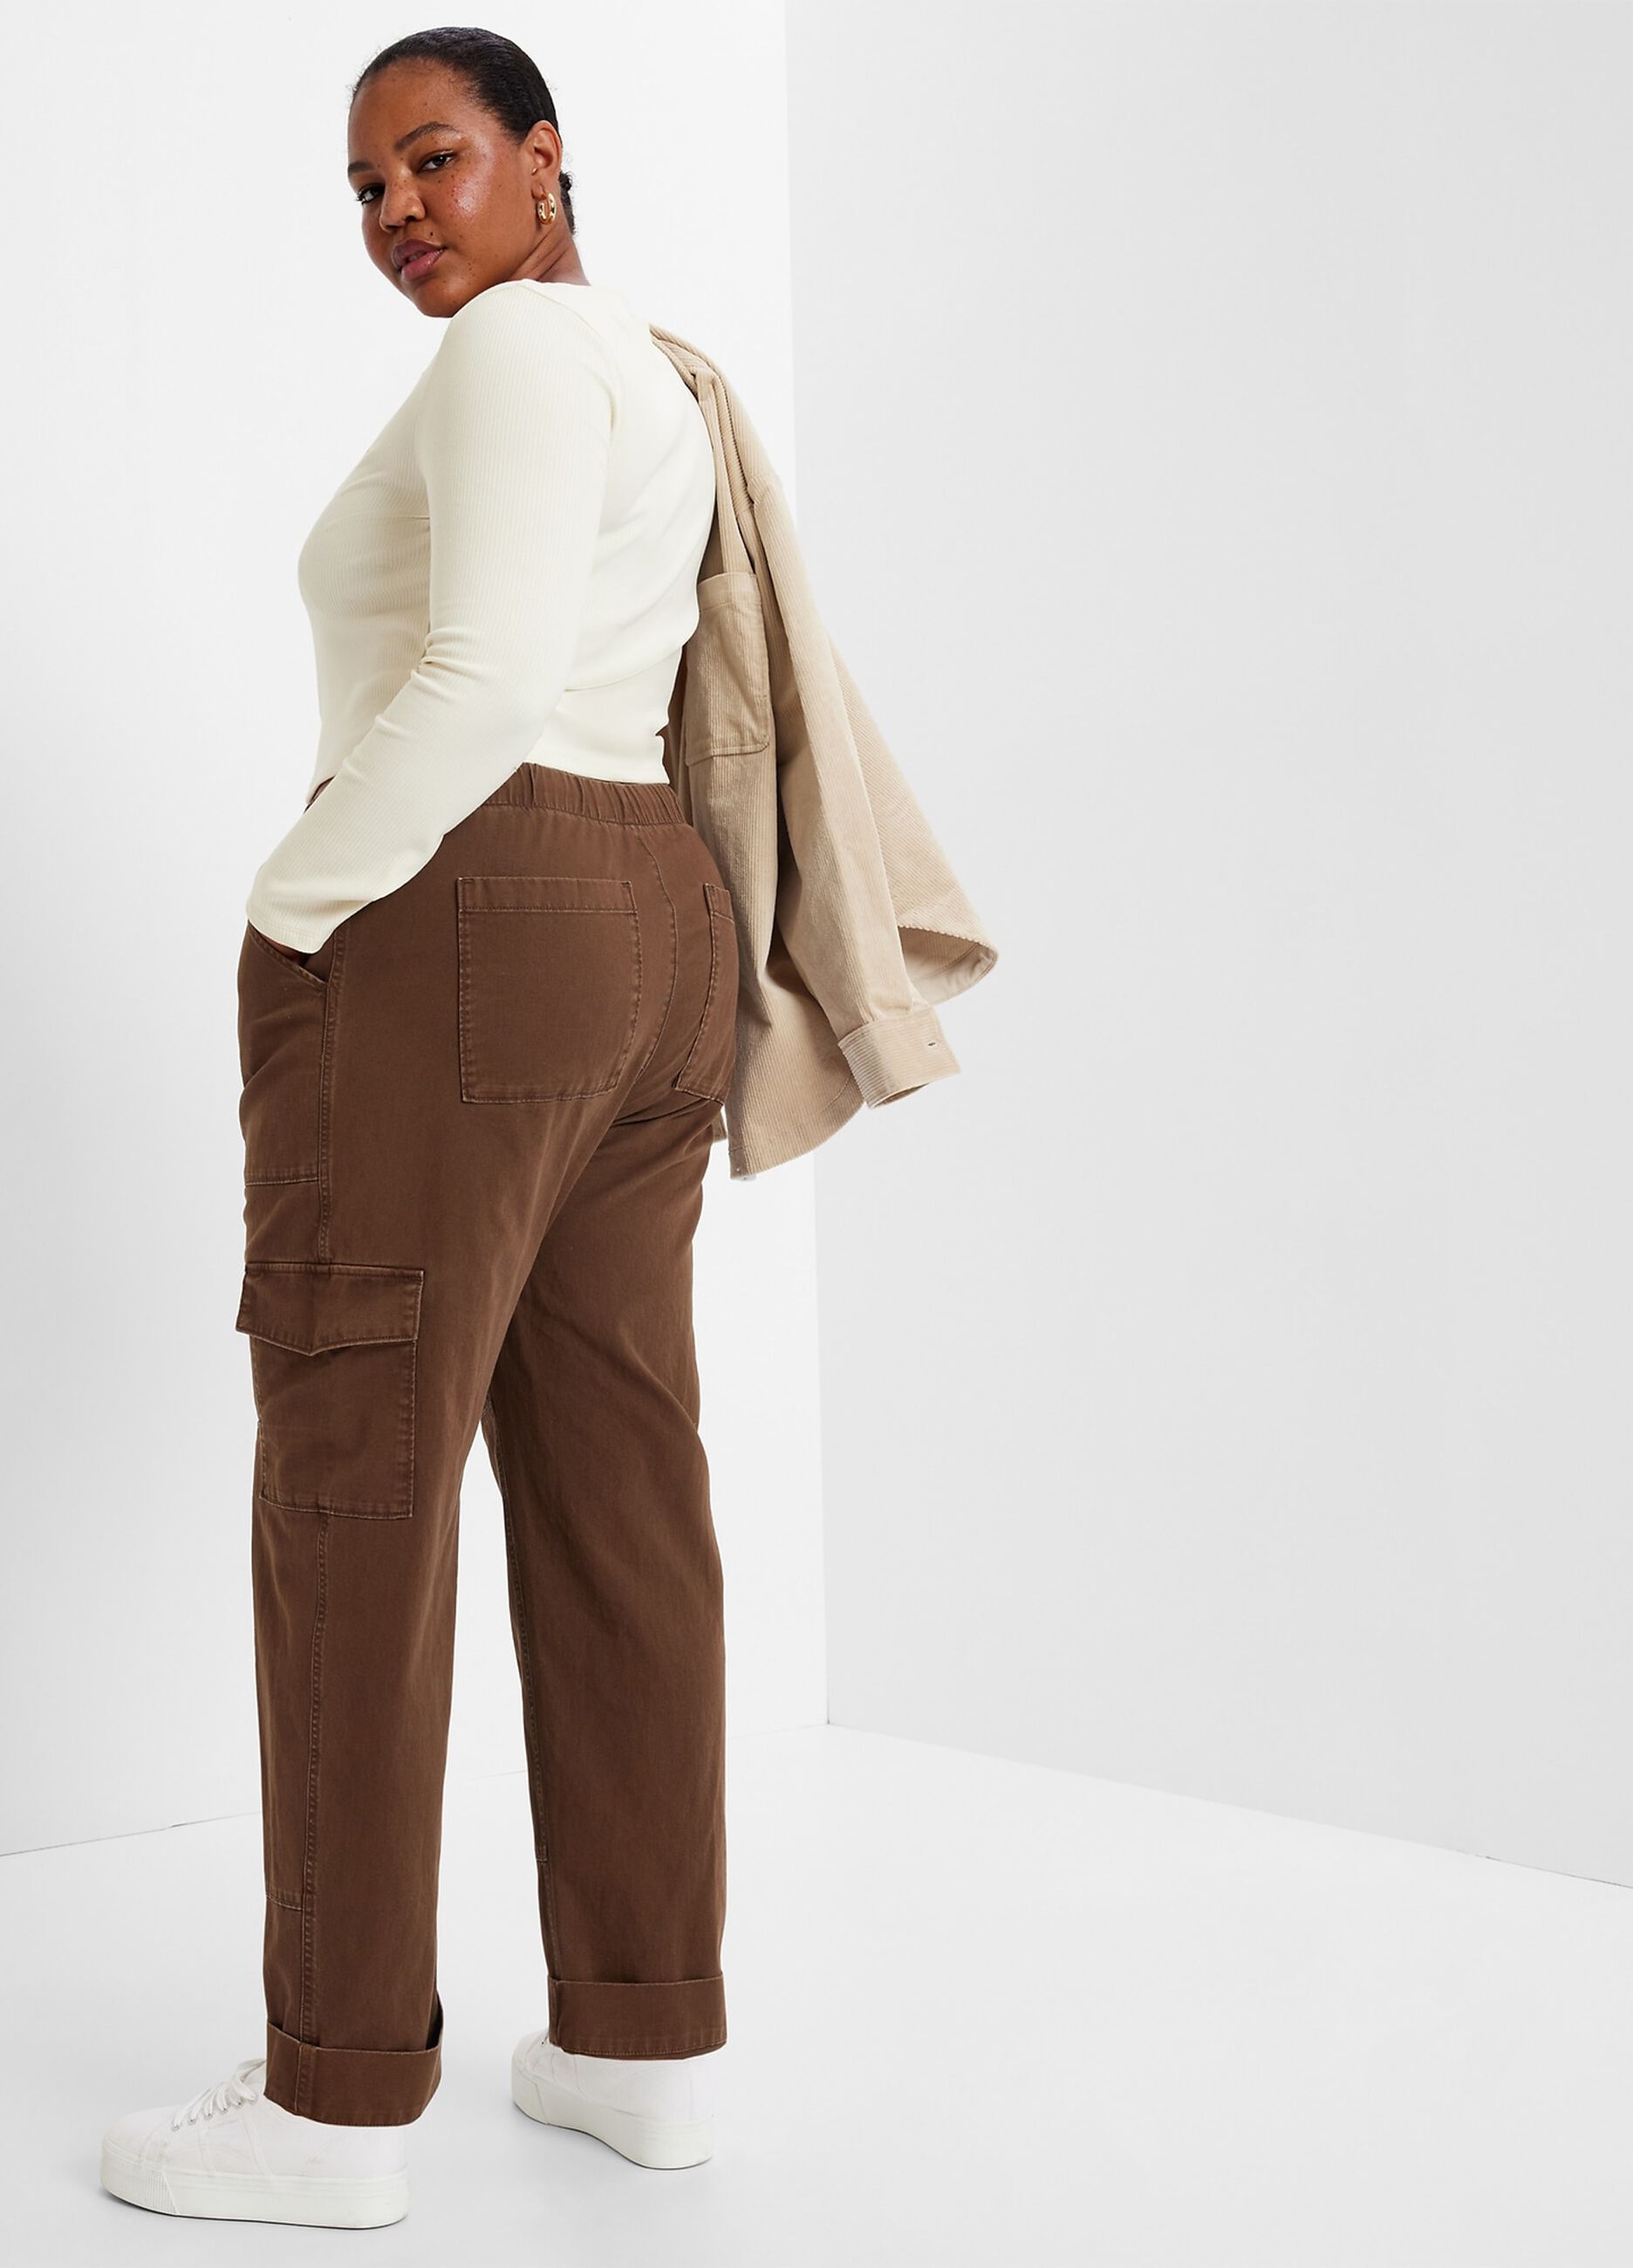 Pantalone utility pull on con coulisse